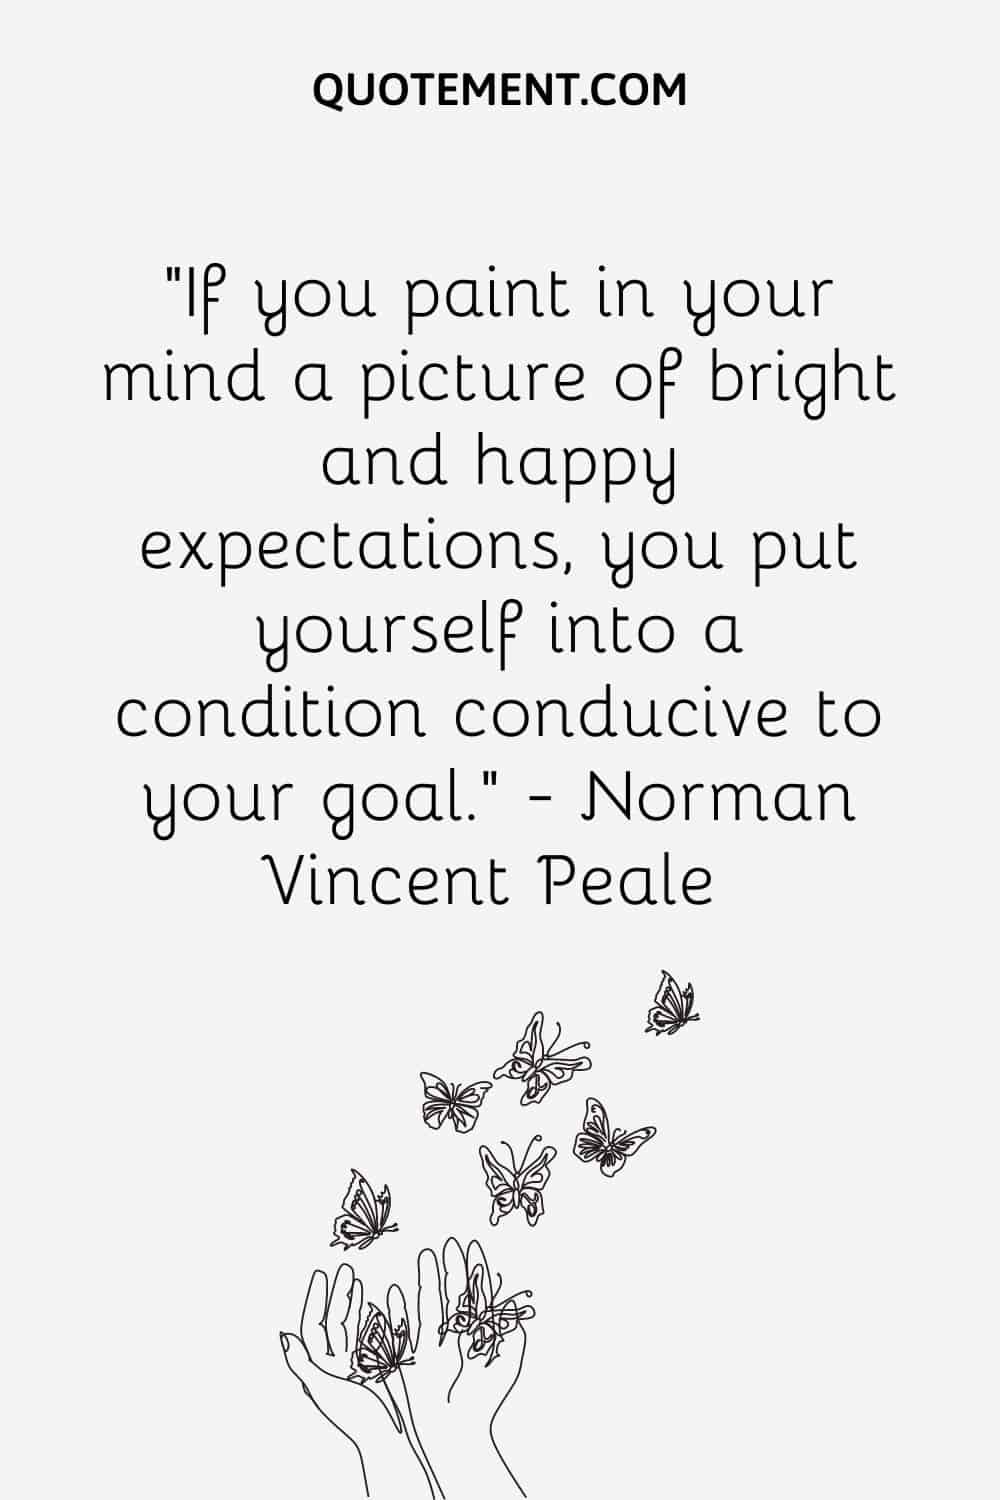 If you paint in your mind a picture of bright and happy expectations, you put yourself into a condition conducive to your goal